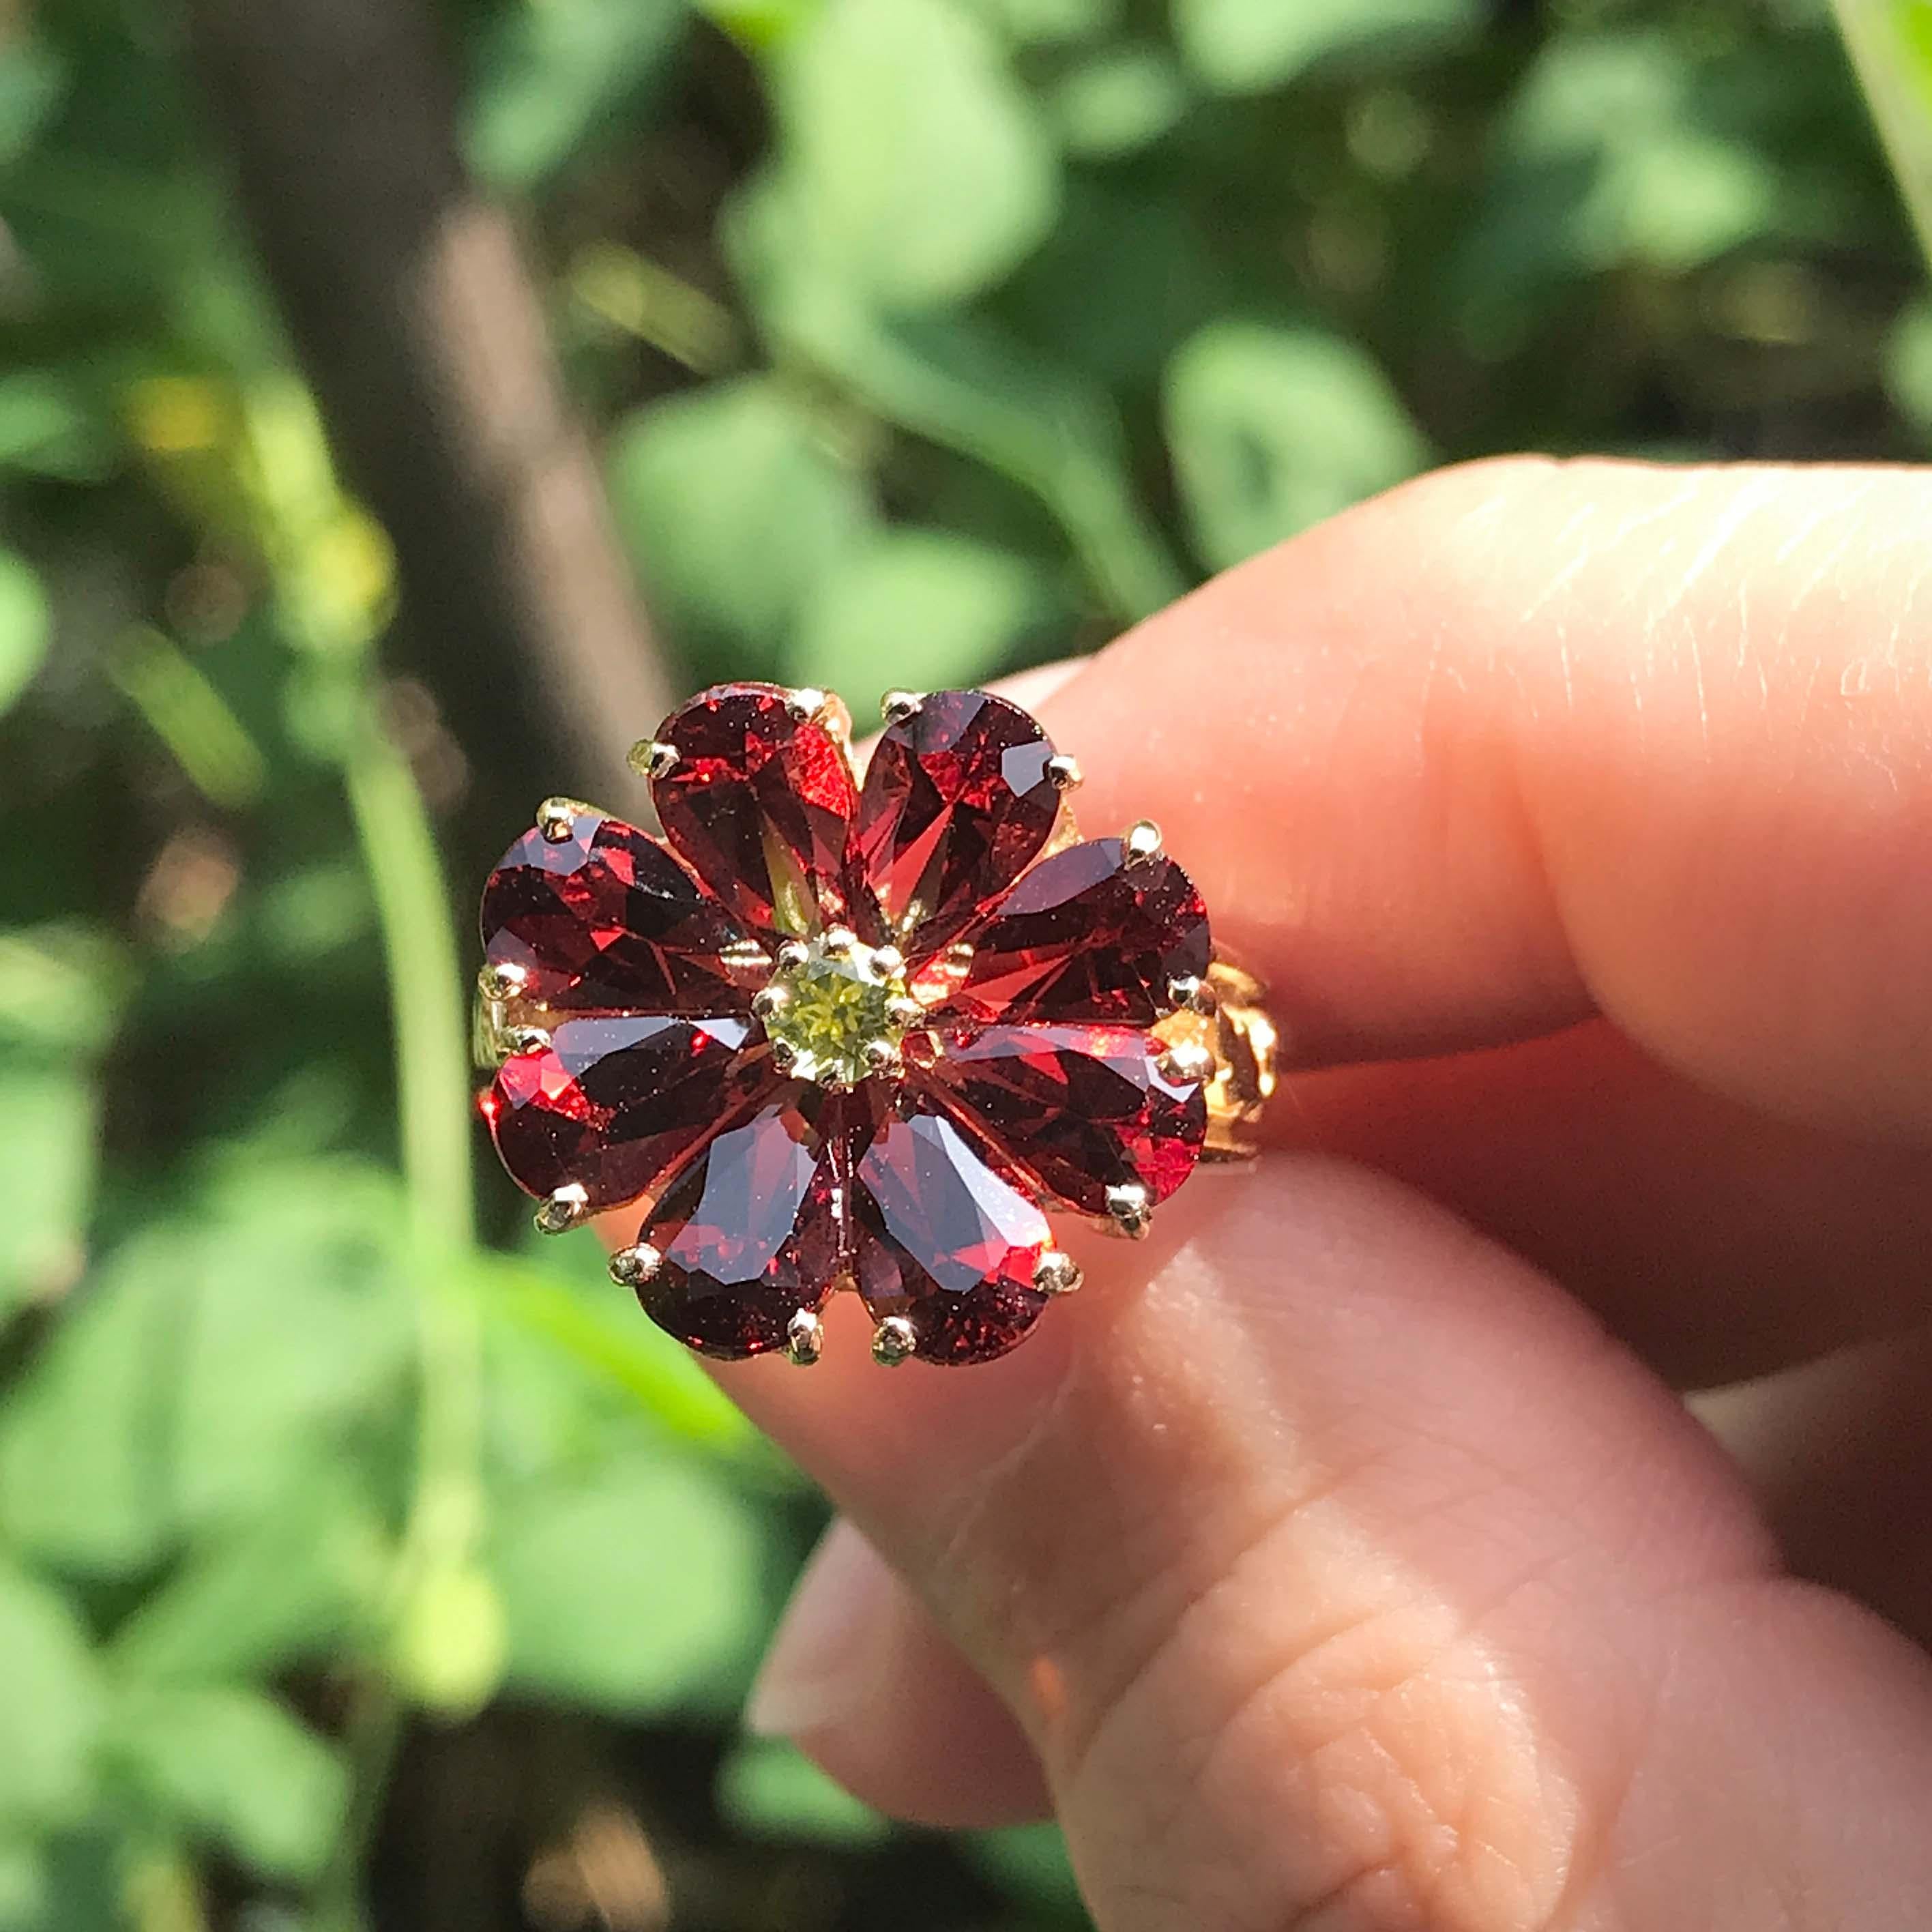 For Sale:  Vintage Style Natural Peridot and Garnet Flower Cluster Ring in 14K Yellow 2